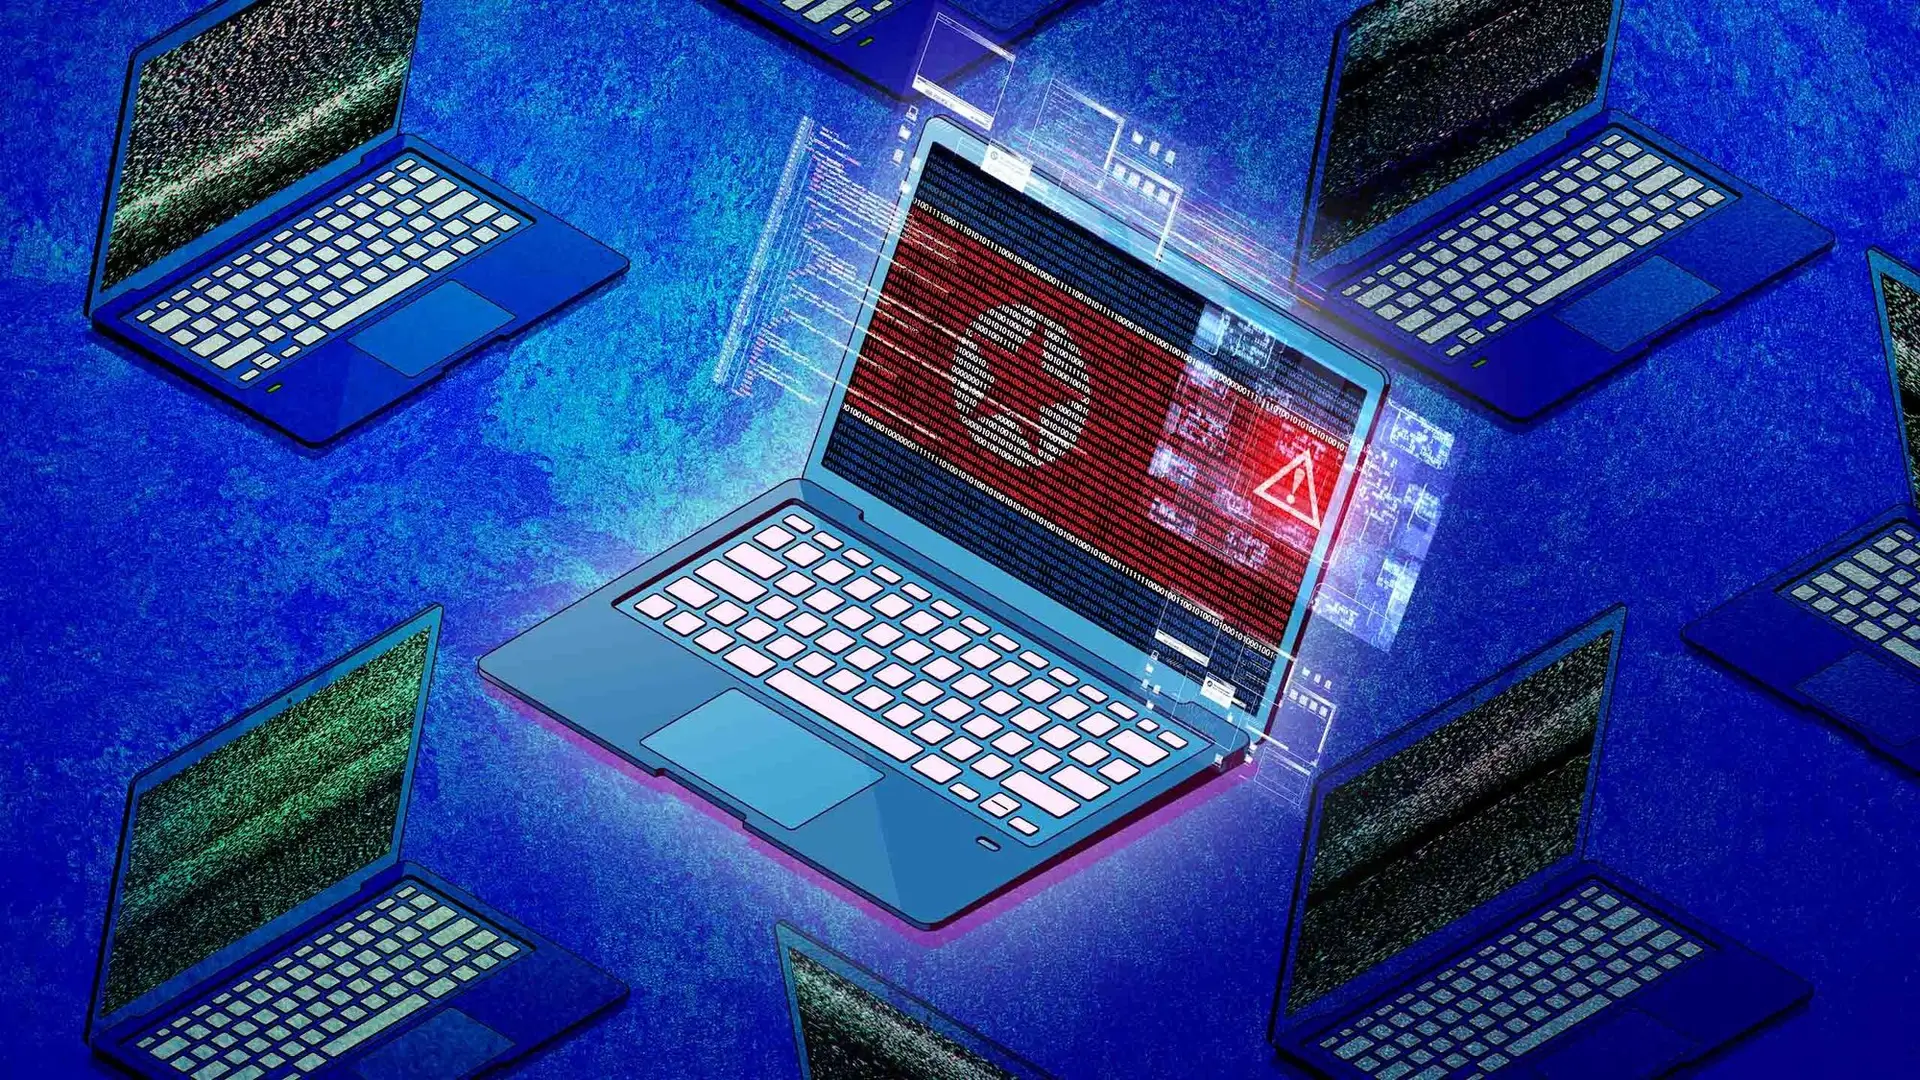 Cover Image of Post: South Korean chip makers targeted by hackers from North, spy agency warns